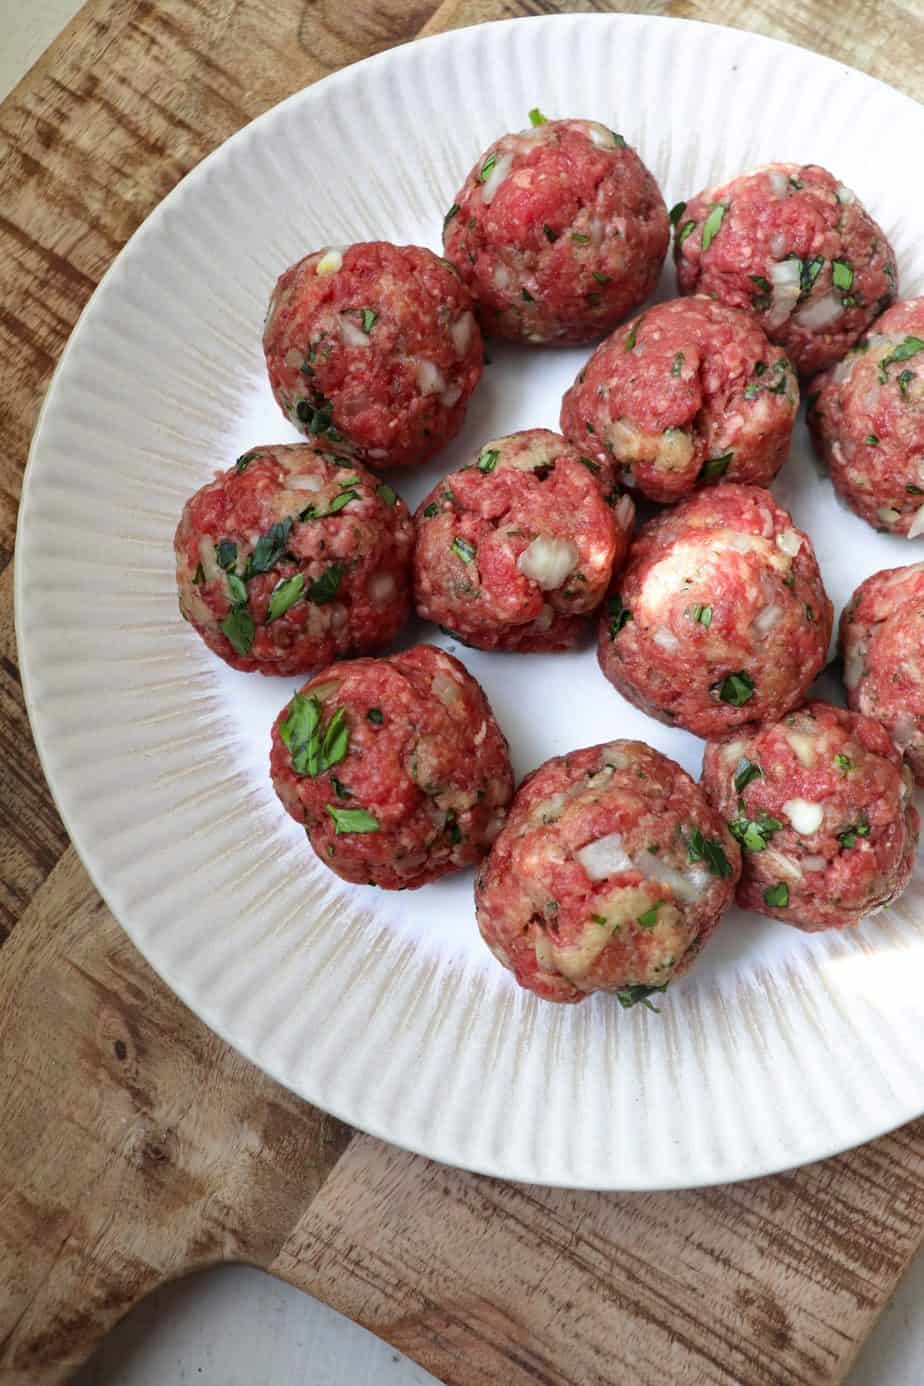 rolled meatballs that are uncooked on a plate.